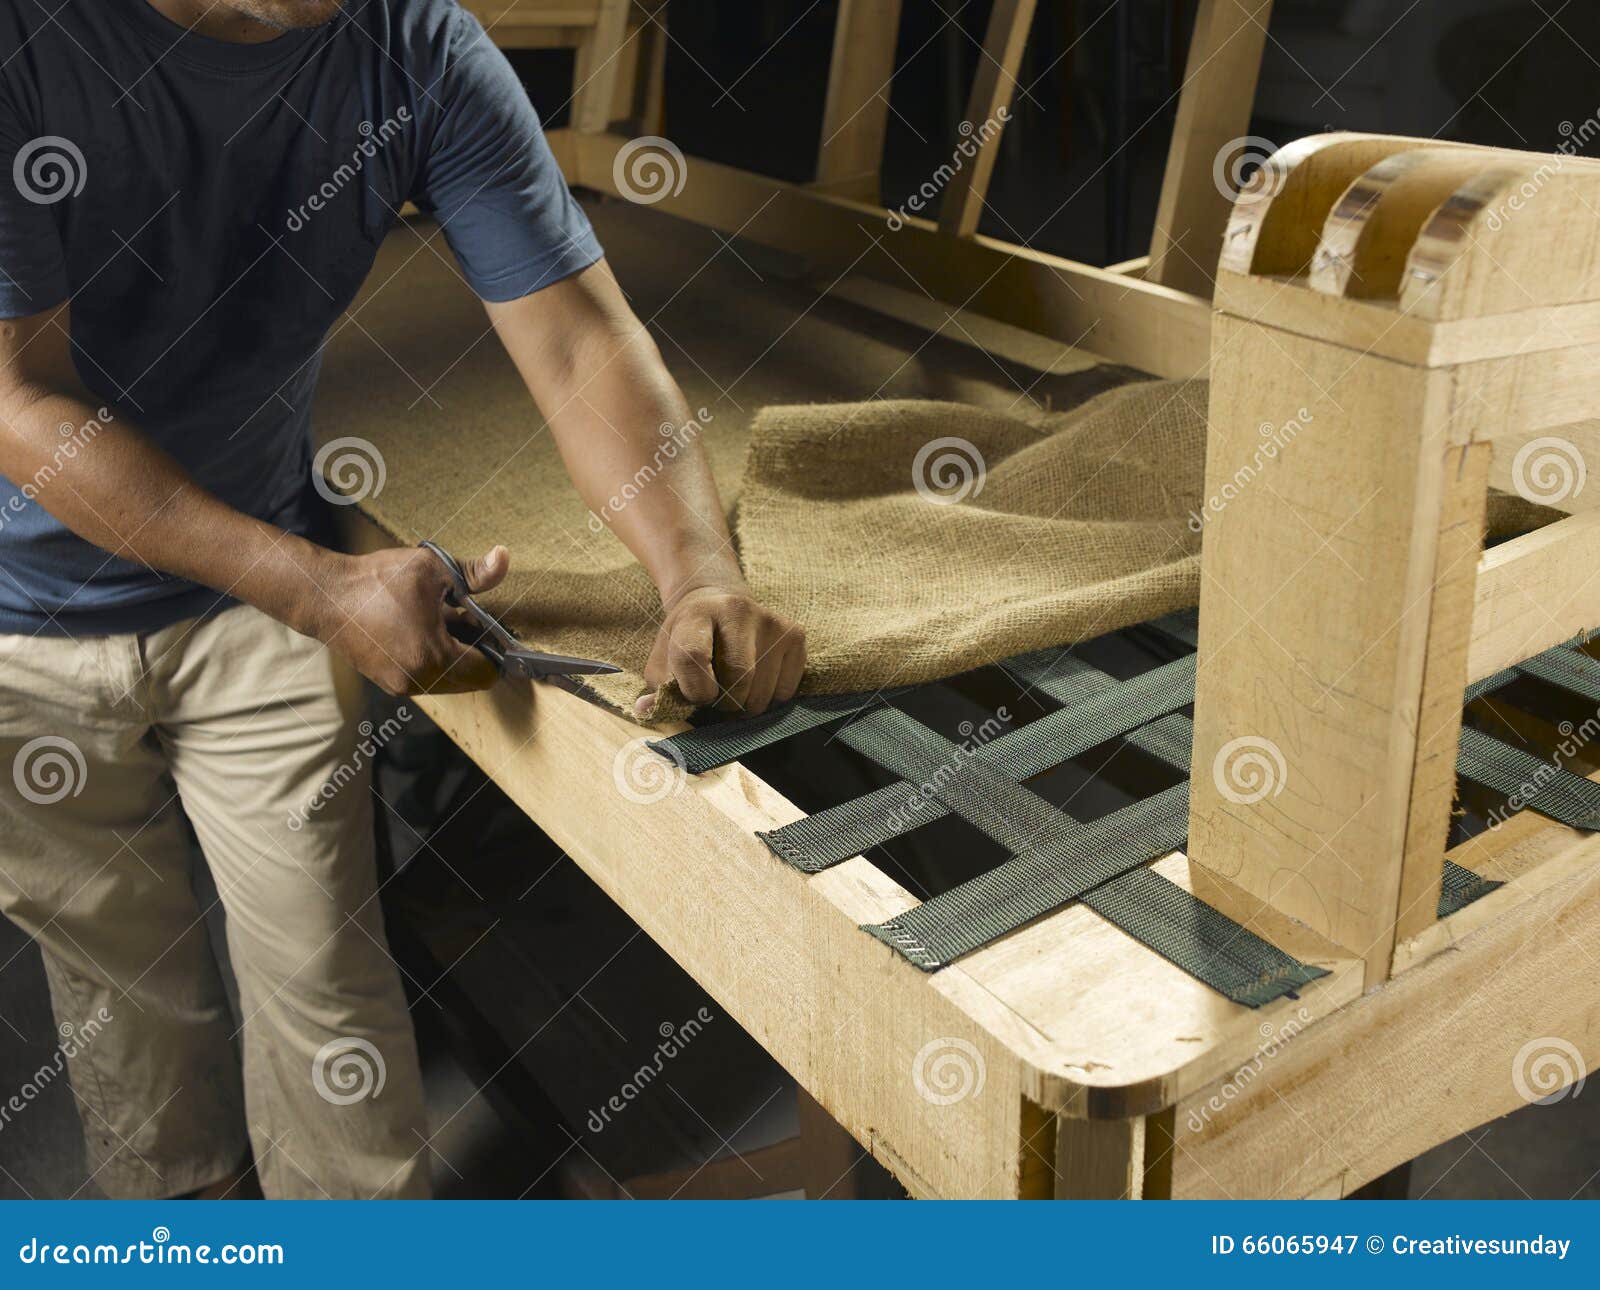 Detailed Charles Keasing the purpose Sofa manufacturing stock image. Image of scissors, worker - 66065947